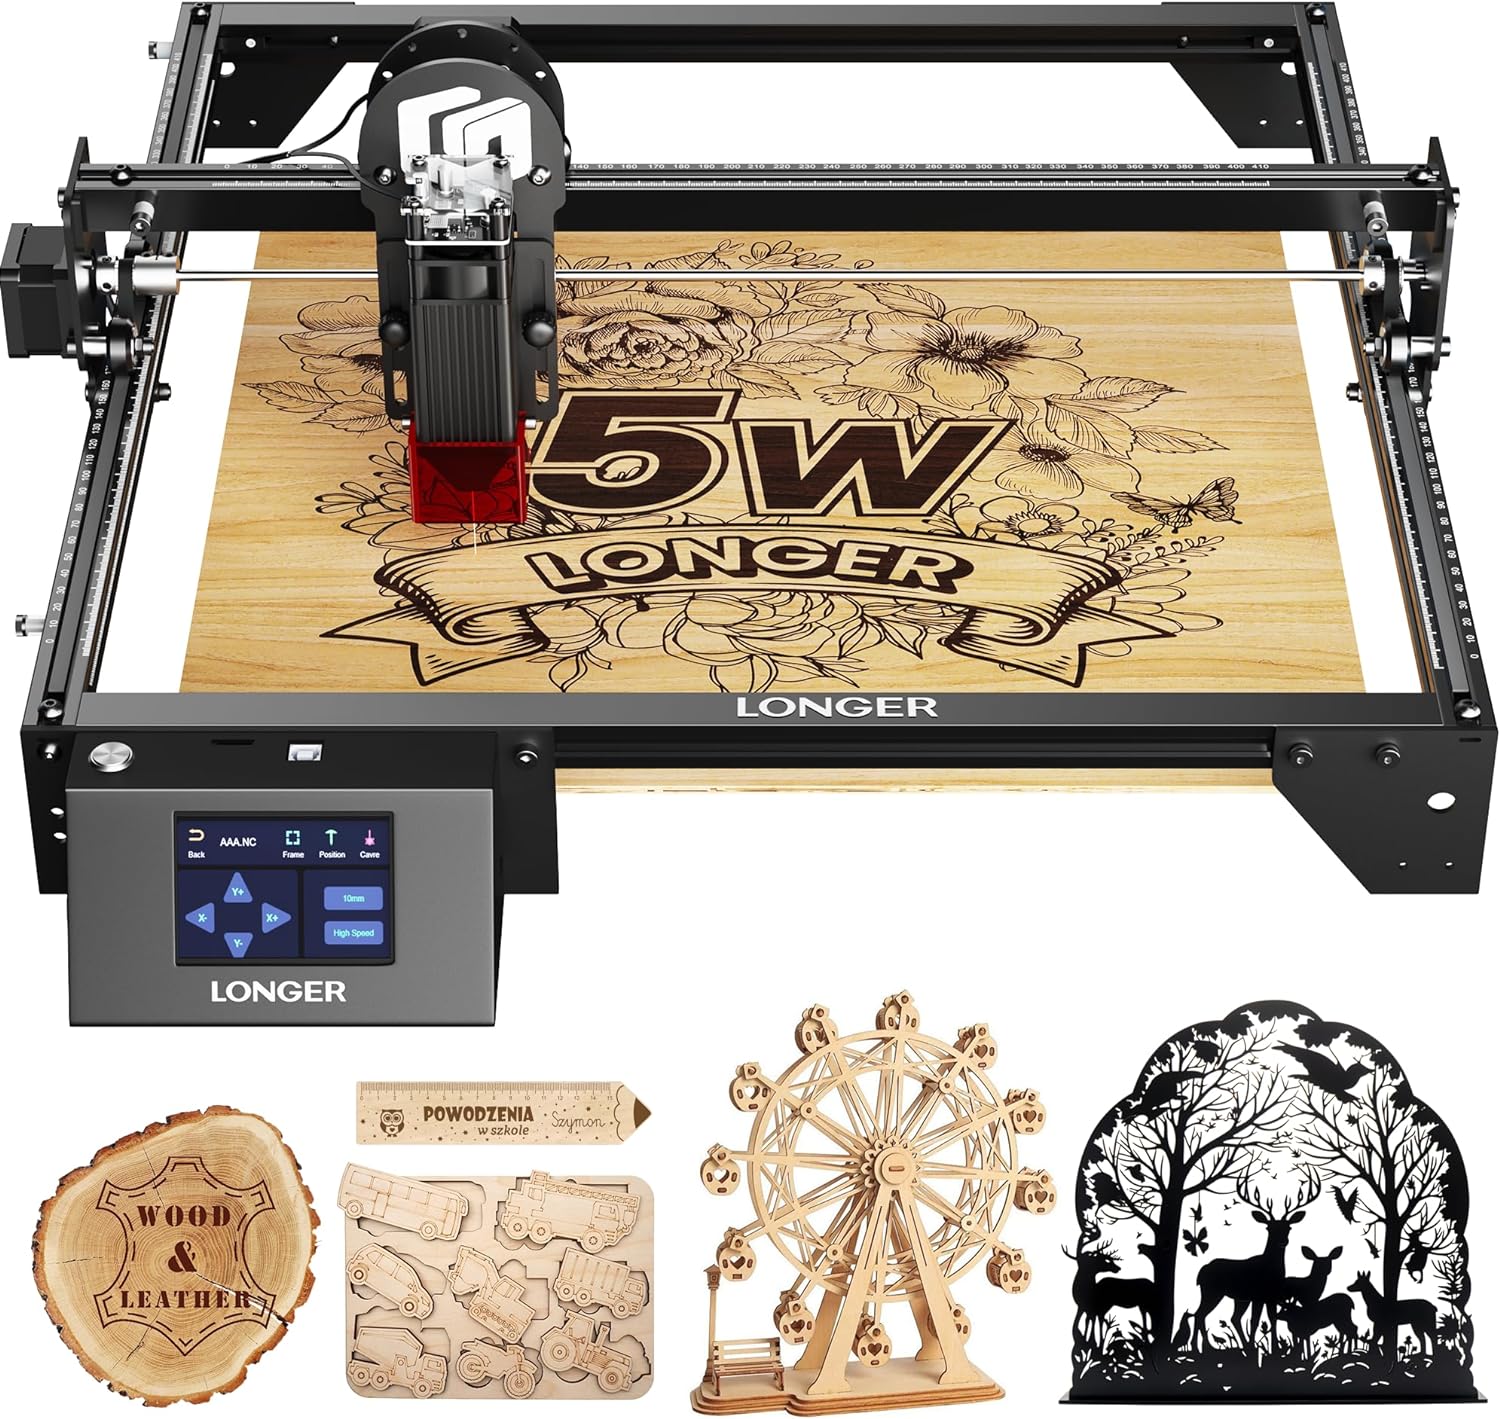 VEVOR Laser Engraver 5W Output Laser Engraving Machine 16.1 x 15.7 Large Working Area 10000mm/min Movement Speed Compressed Spot with Eye